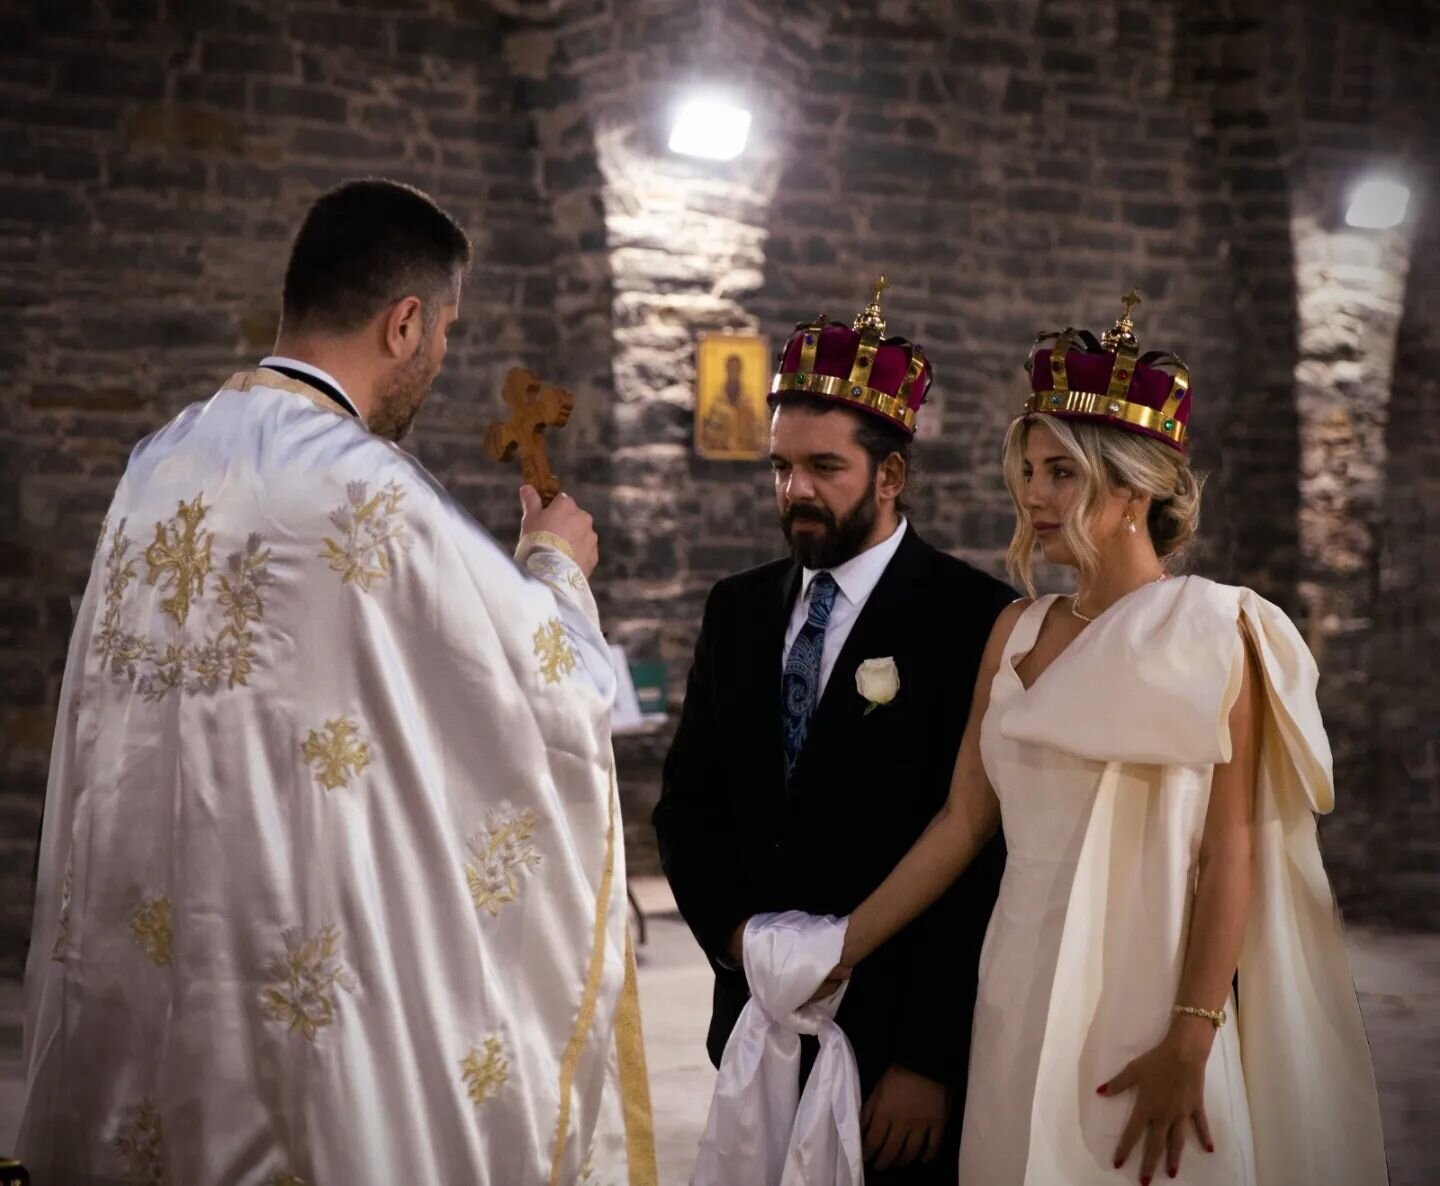 I'm still pinching myself....we got married Agapi mou!❤️@jelenakarisik 

I'll never forget how beautiful you looked as my queen on our special day 👸🏼

The true #coronation 🫅🏻👸🏼😉 

#orthodox #wedding #greek #serbian #agape